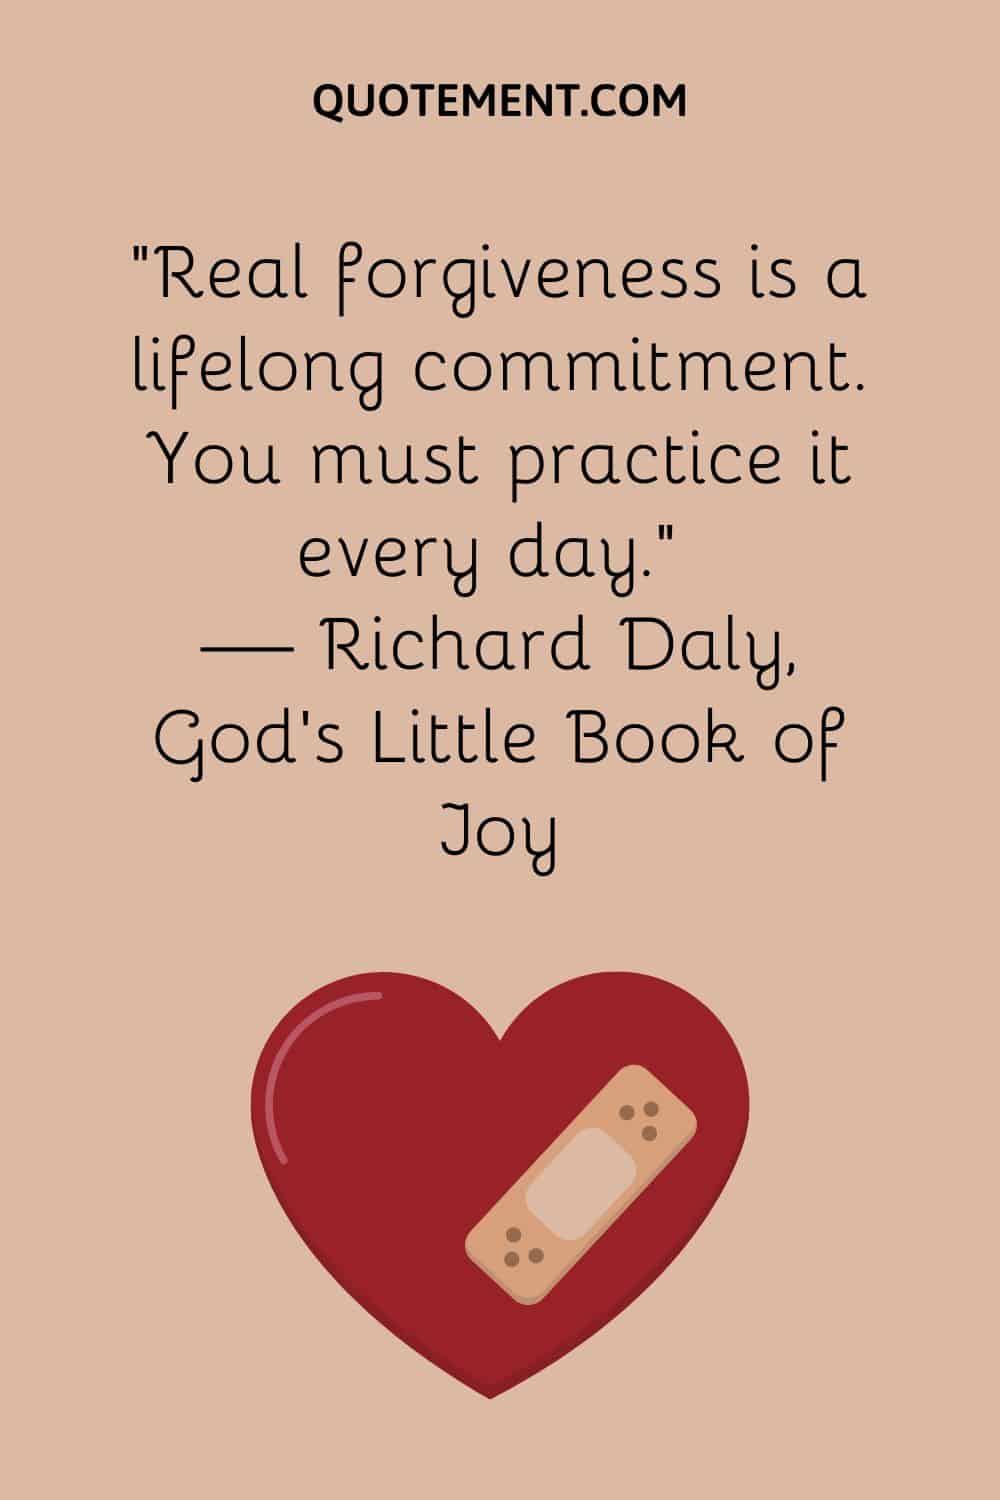 Real forgiveness is a lifelong commitment